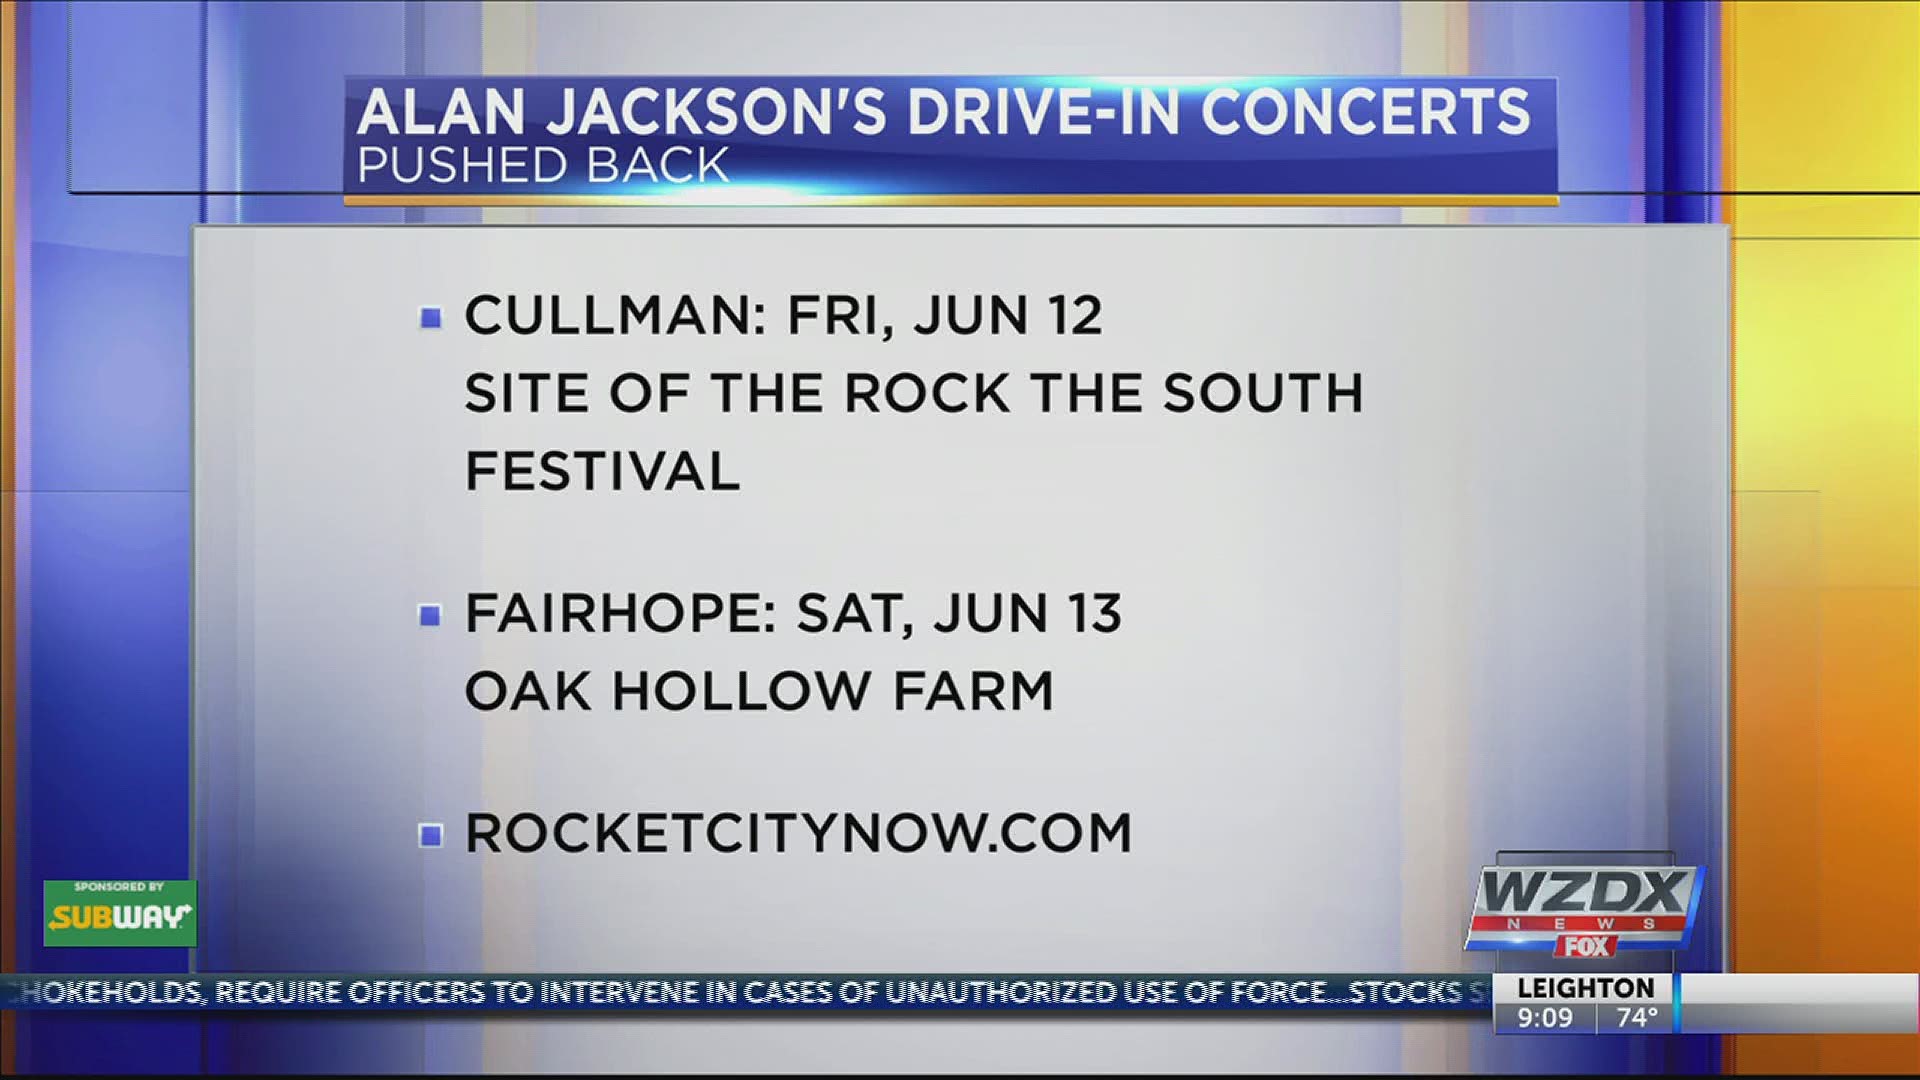 The Rock the South Drive-in concerts in Cullman and Fairhope will be on June 12 and 13.